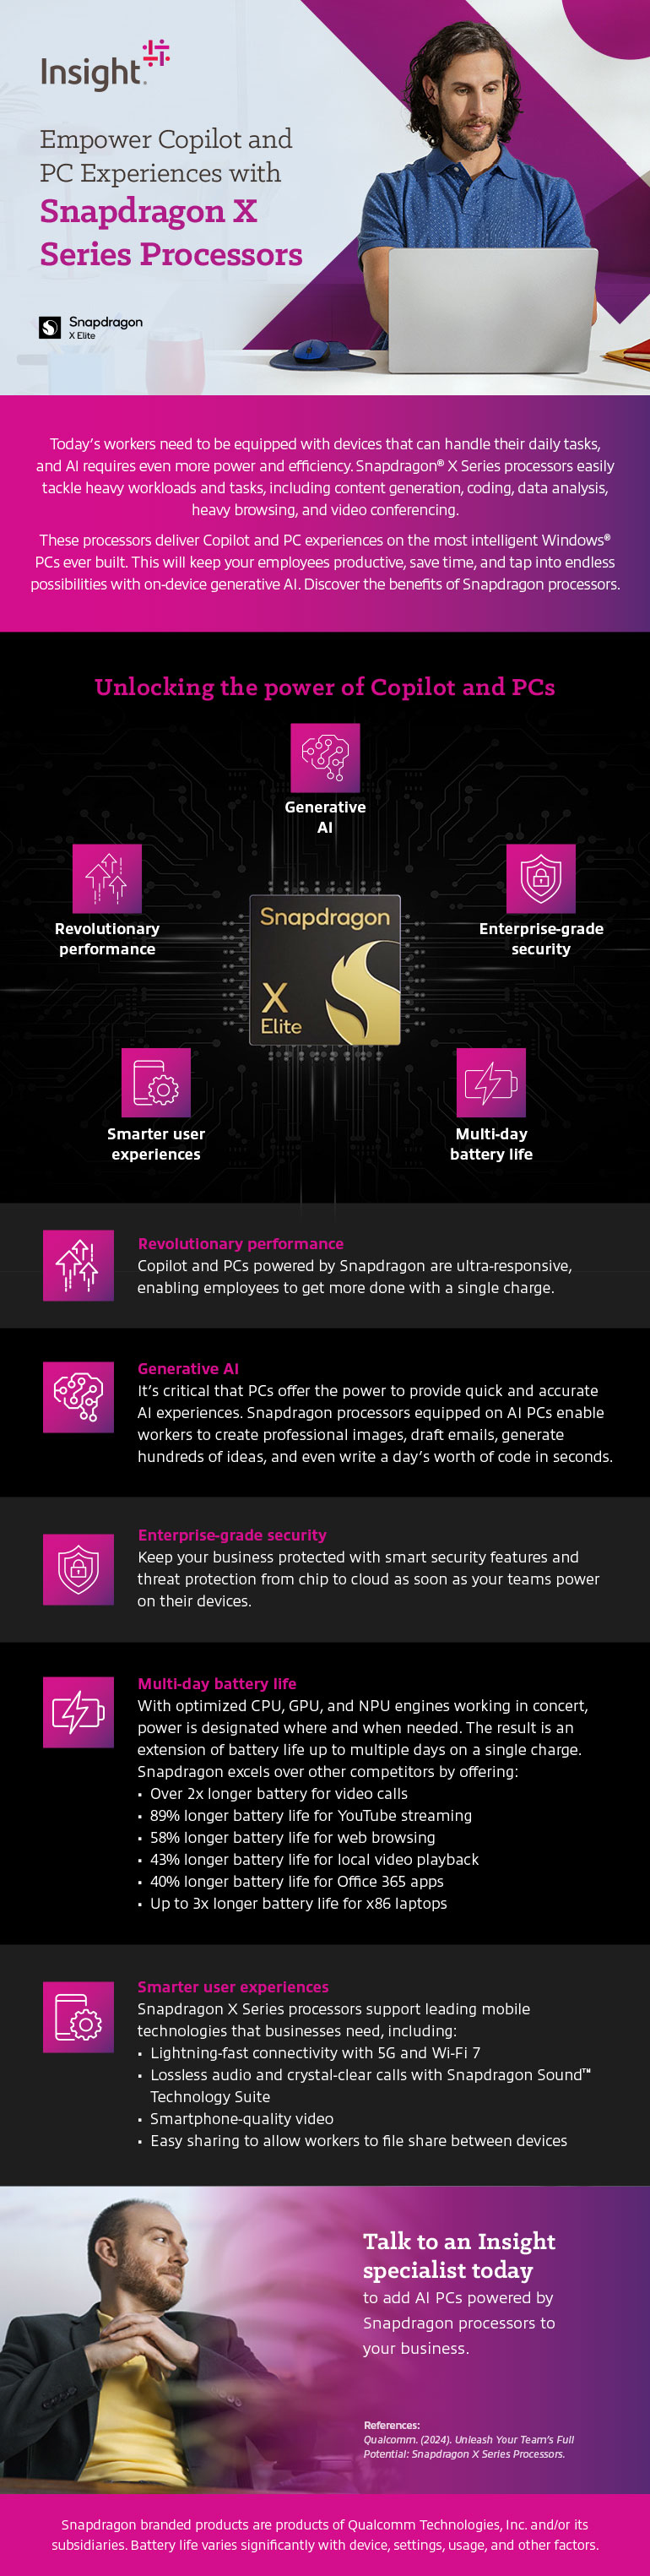 Empower Copilot and PC Experiences with Snapdragon X Series Processors infographic